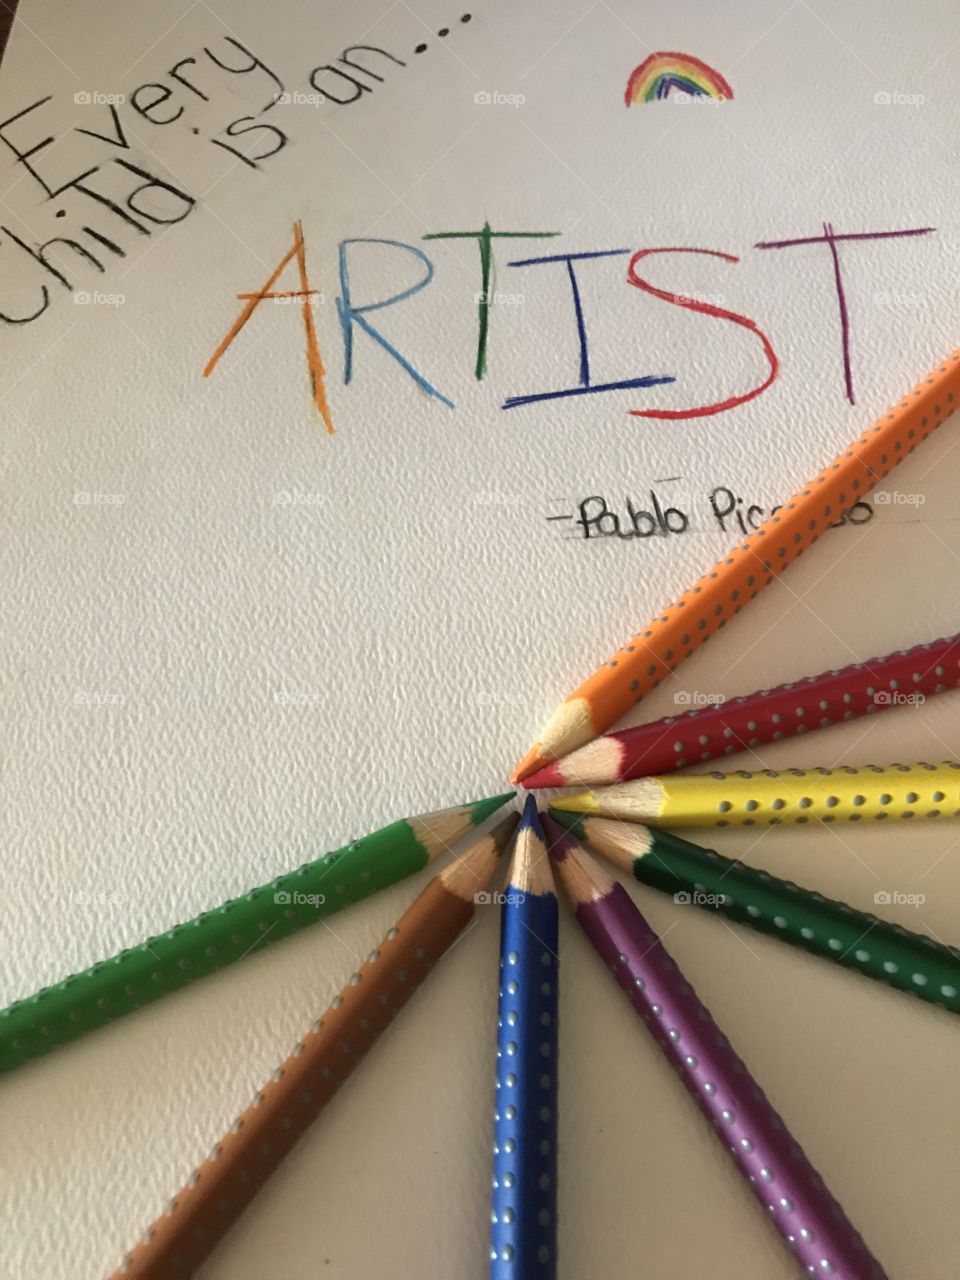 Every child is an artist 